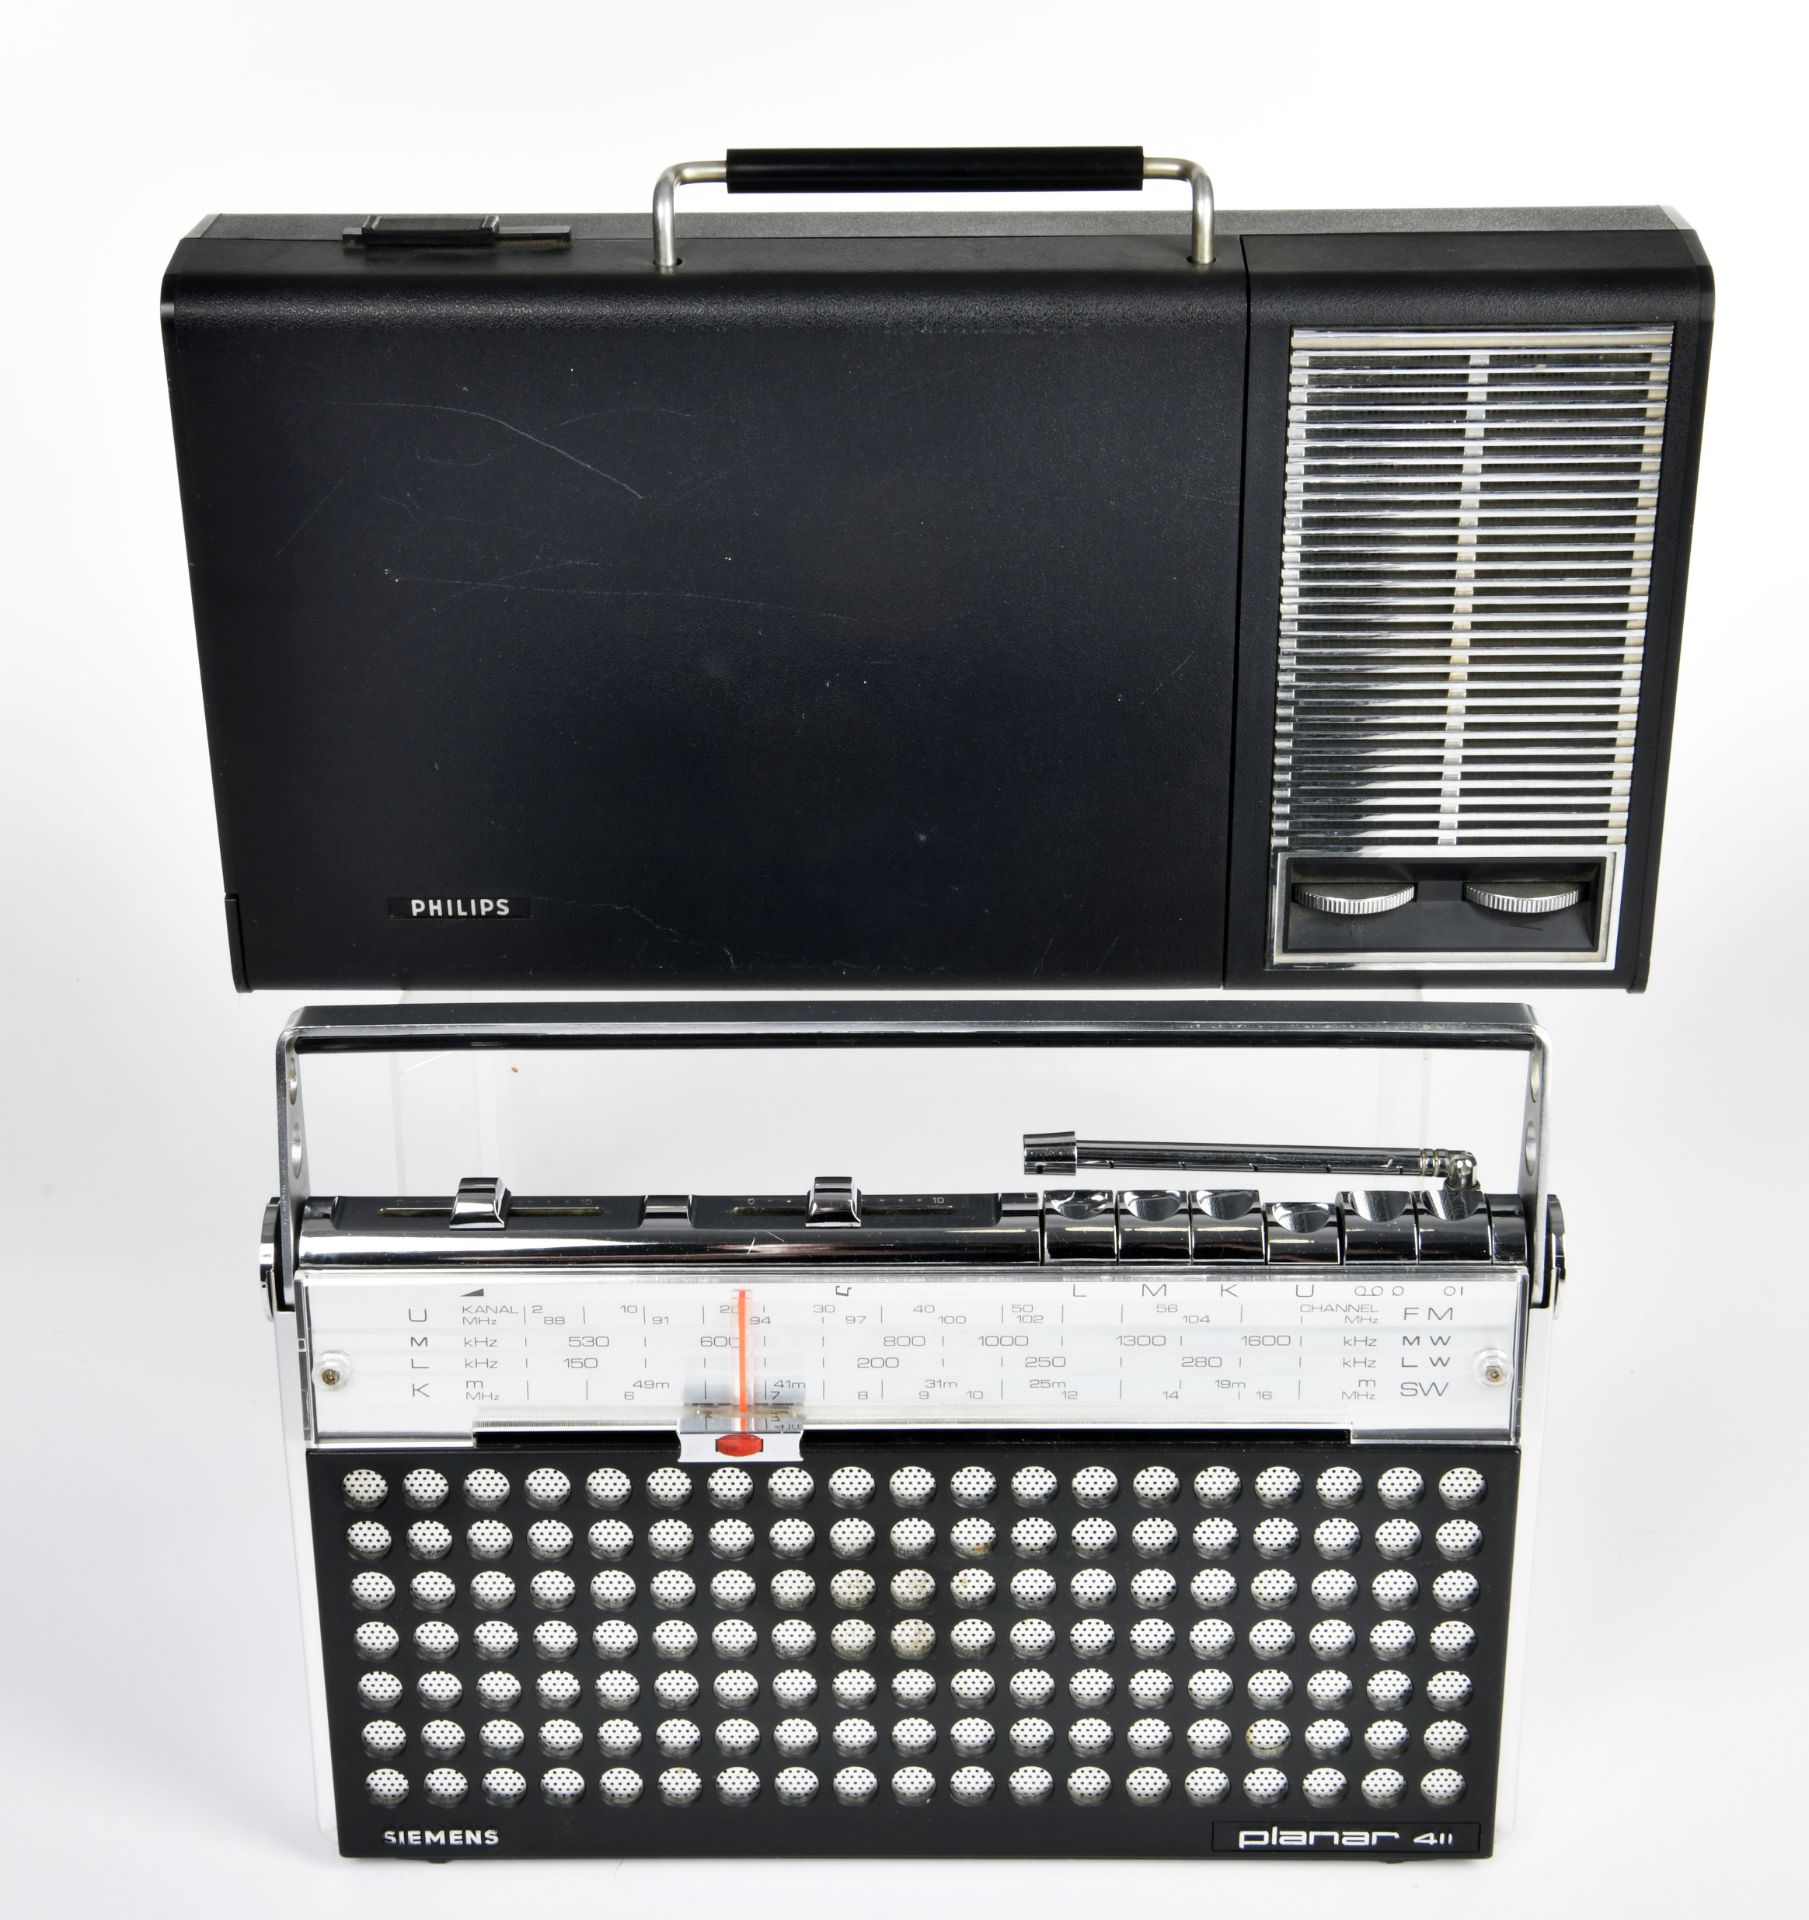 Siemens, portable radio Planar 411 + Philips record player with installed amplifier, traces of